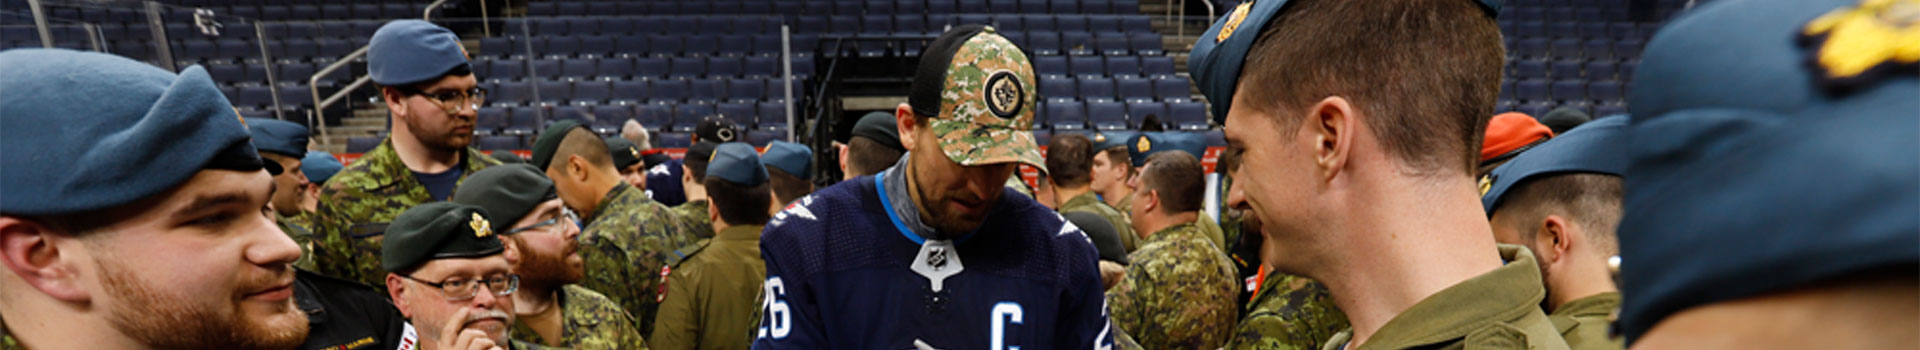 Winnipeg Jets - How about these Canadian Armed Forces warm